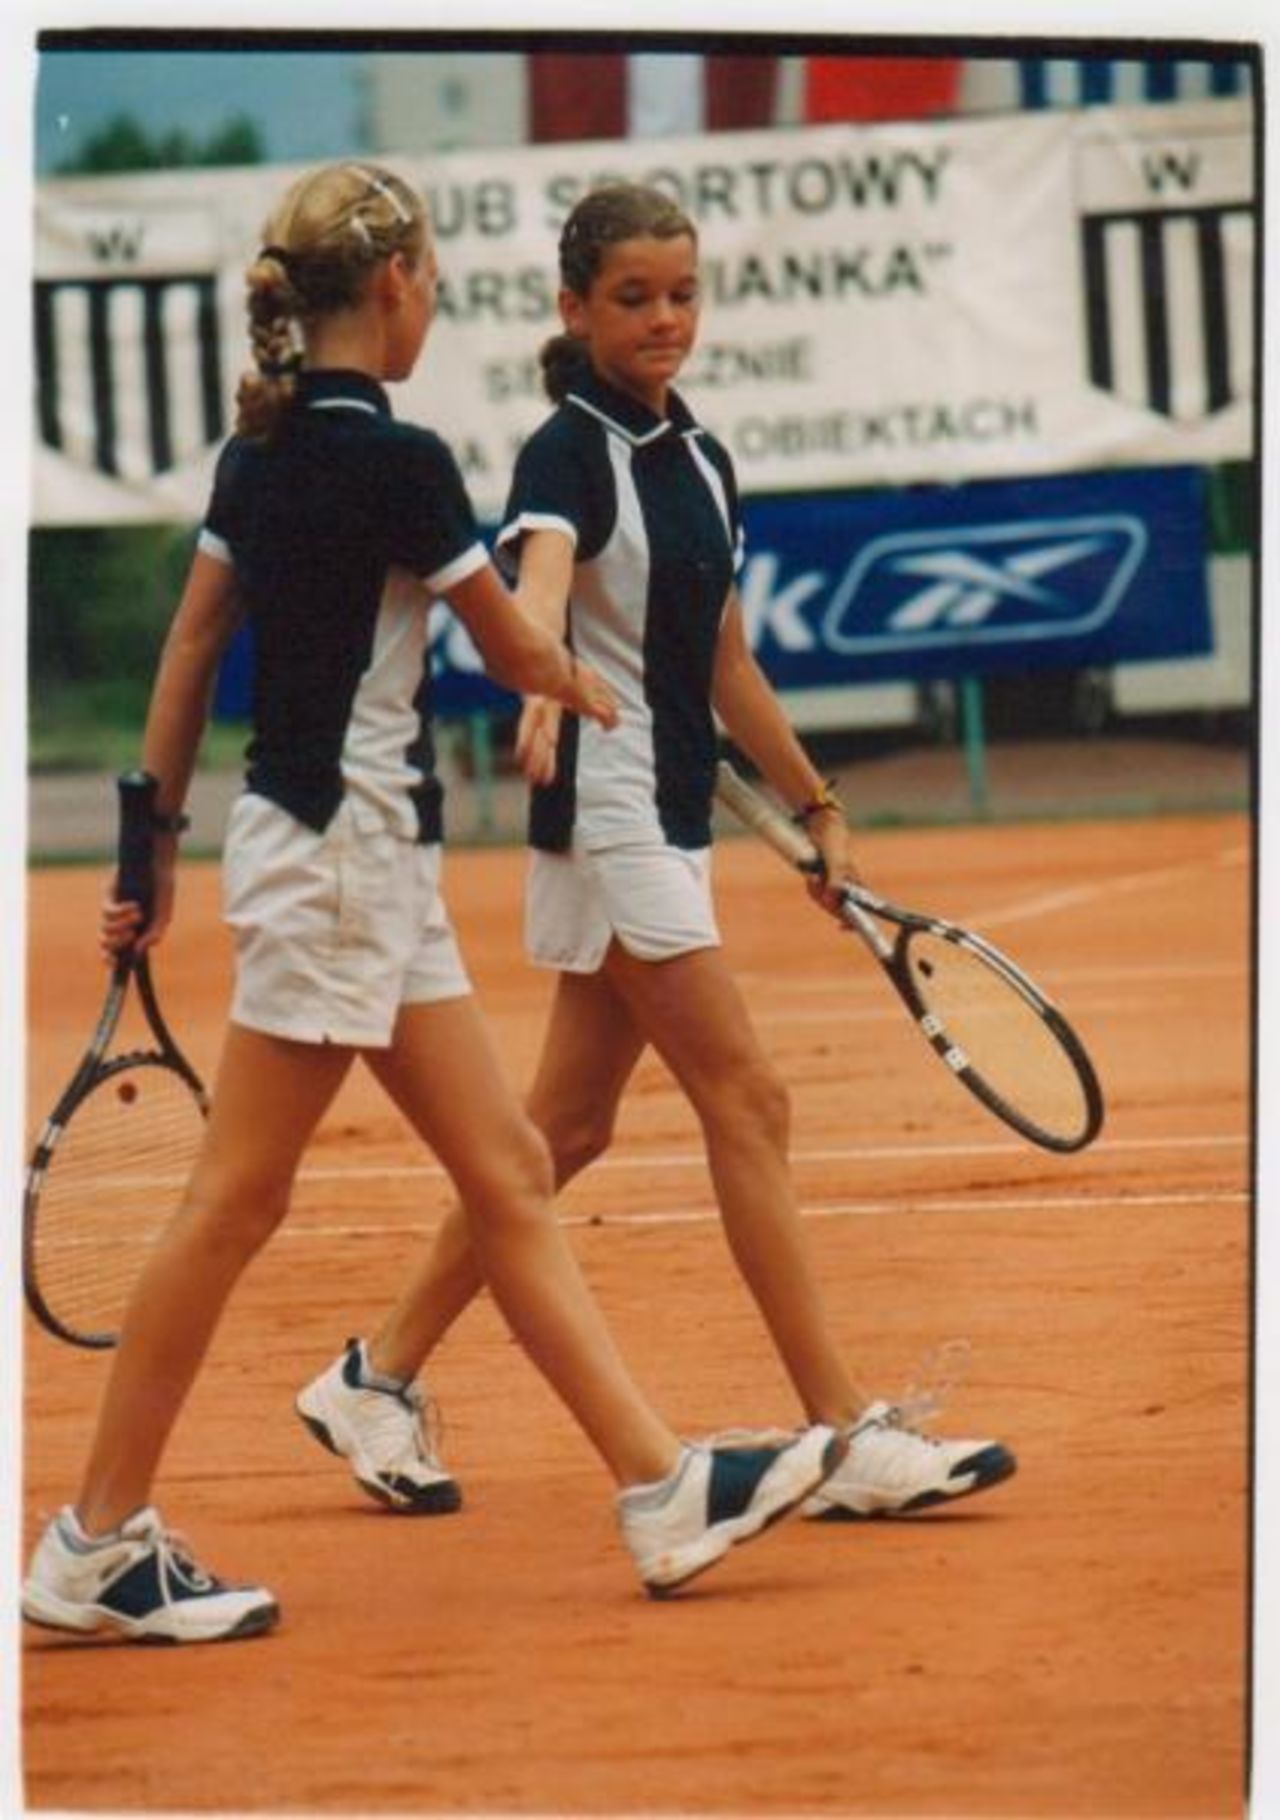 The sisters' doubles partnership goes back to childhood. In 2012, they proudly represented Poland at the Olympic Games -- but suffered defeat in the second round. 